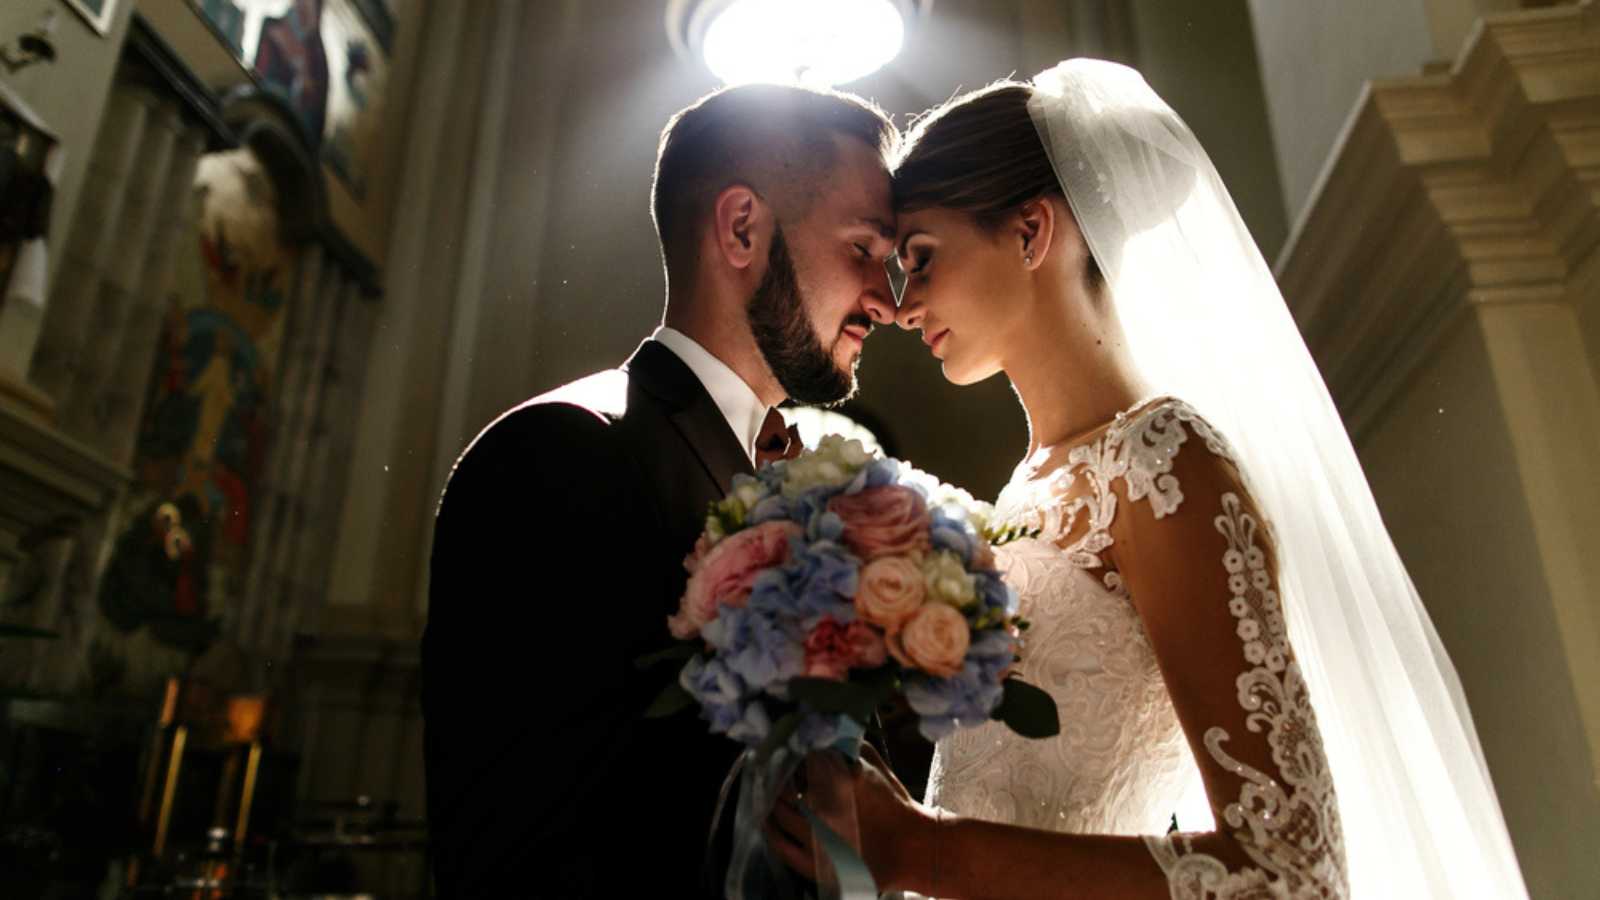 Daylight makes a halo around dreamy wedding couple standing in church